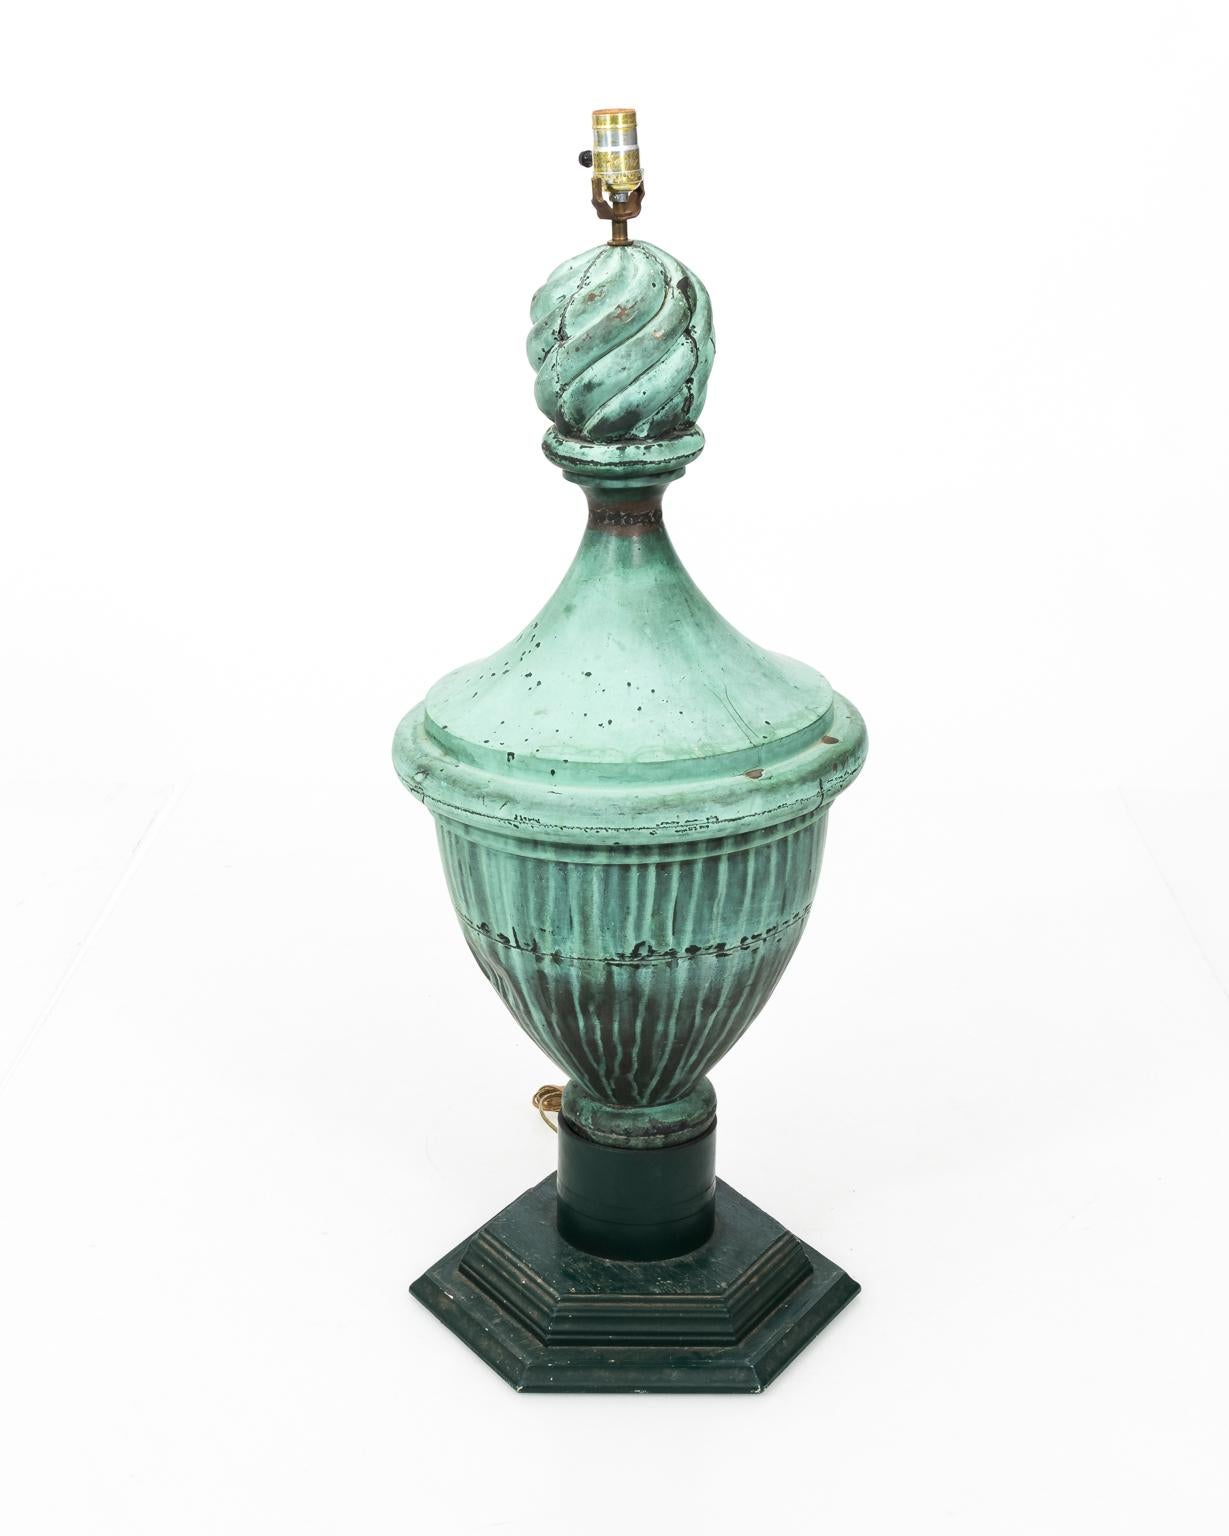 Pair of copper neoclassical style urn finials mounted as lamps with a verdigris finish on wooden bases, circa 1890. Shades not included. Please note that these lamps have wear with age including indents on the body.